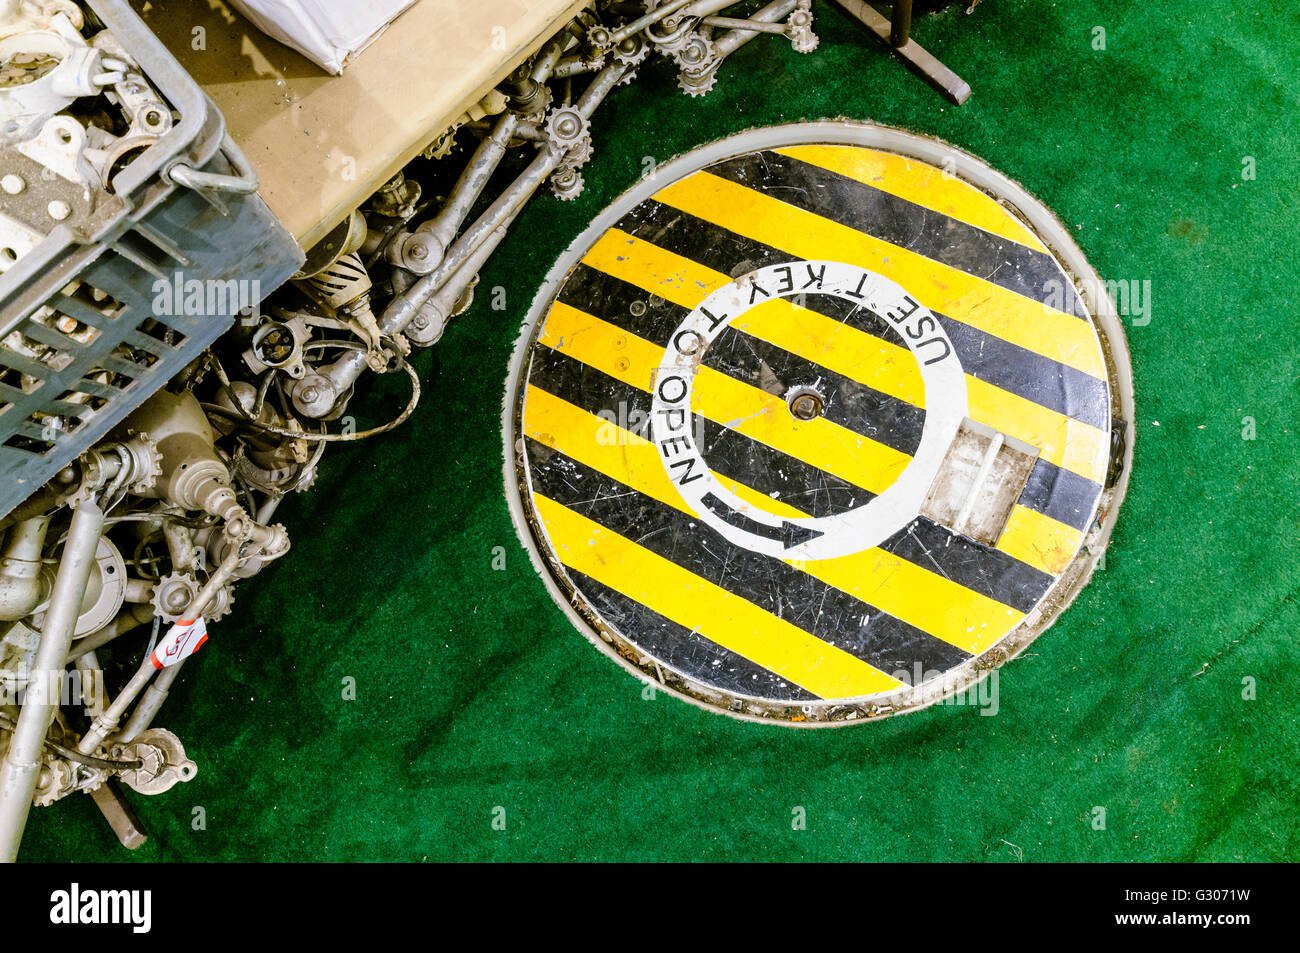 Escape Hatch on a ship for emergency use, which requires a 'T' key to open. Stock Photo